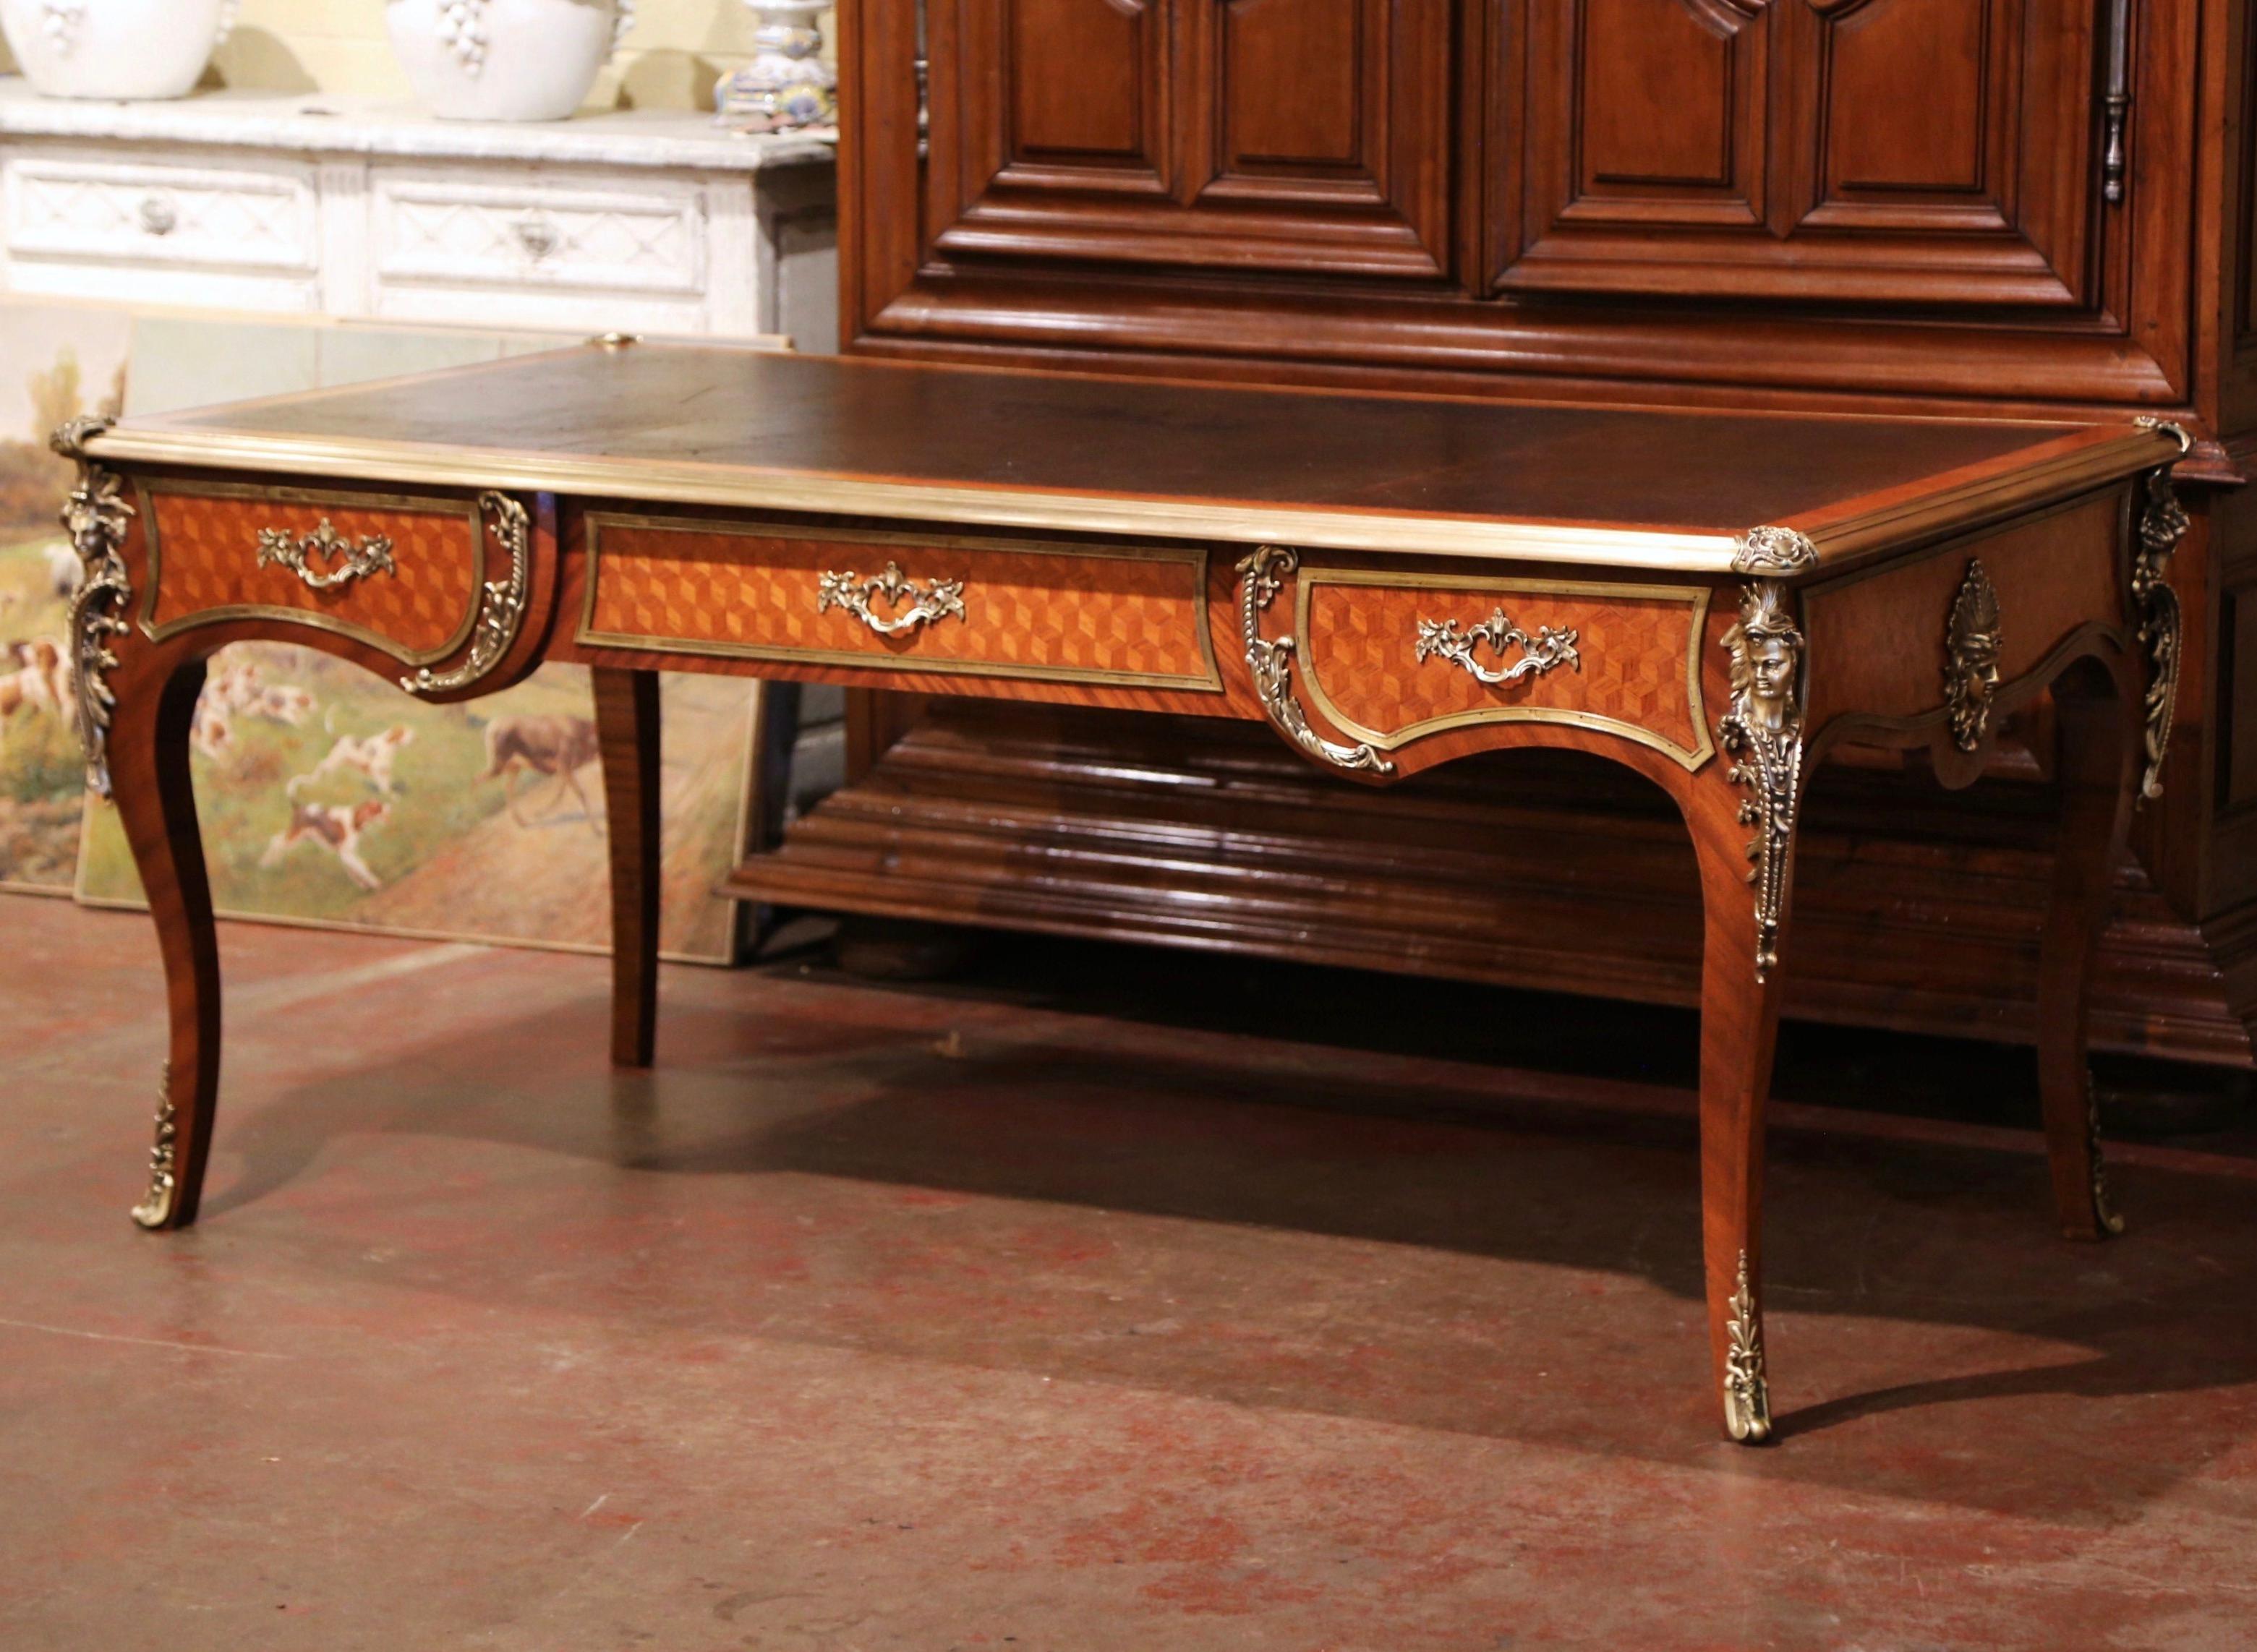 Crafted in Paris, France, circa 1870 in the style of Francois Linke and built of walnut with oak parquetry, the large antique desk stands on elegant cabriole legs decorated at the shoulder with bronze figural busts of woman wearing floral